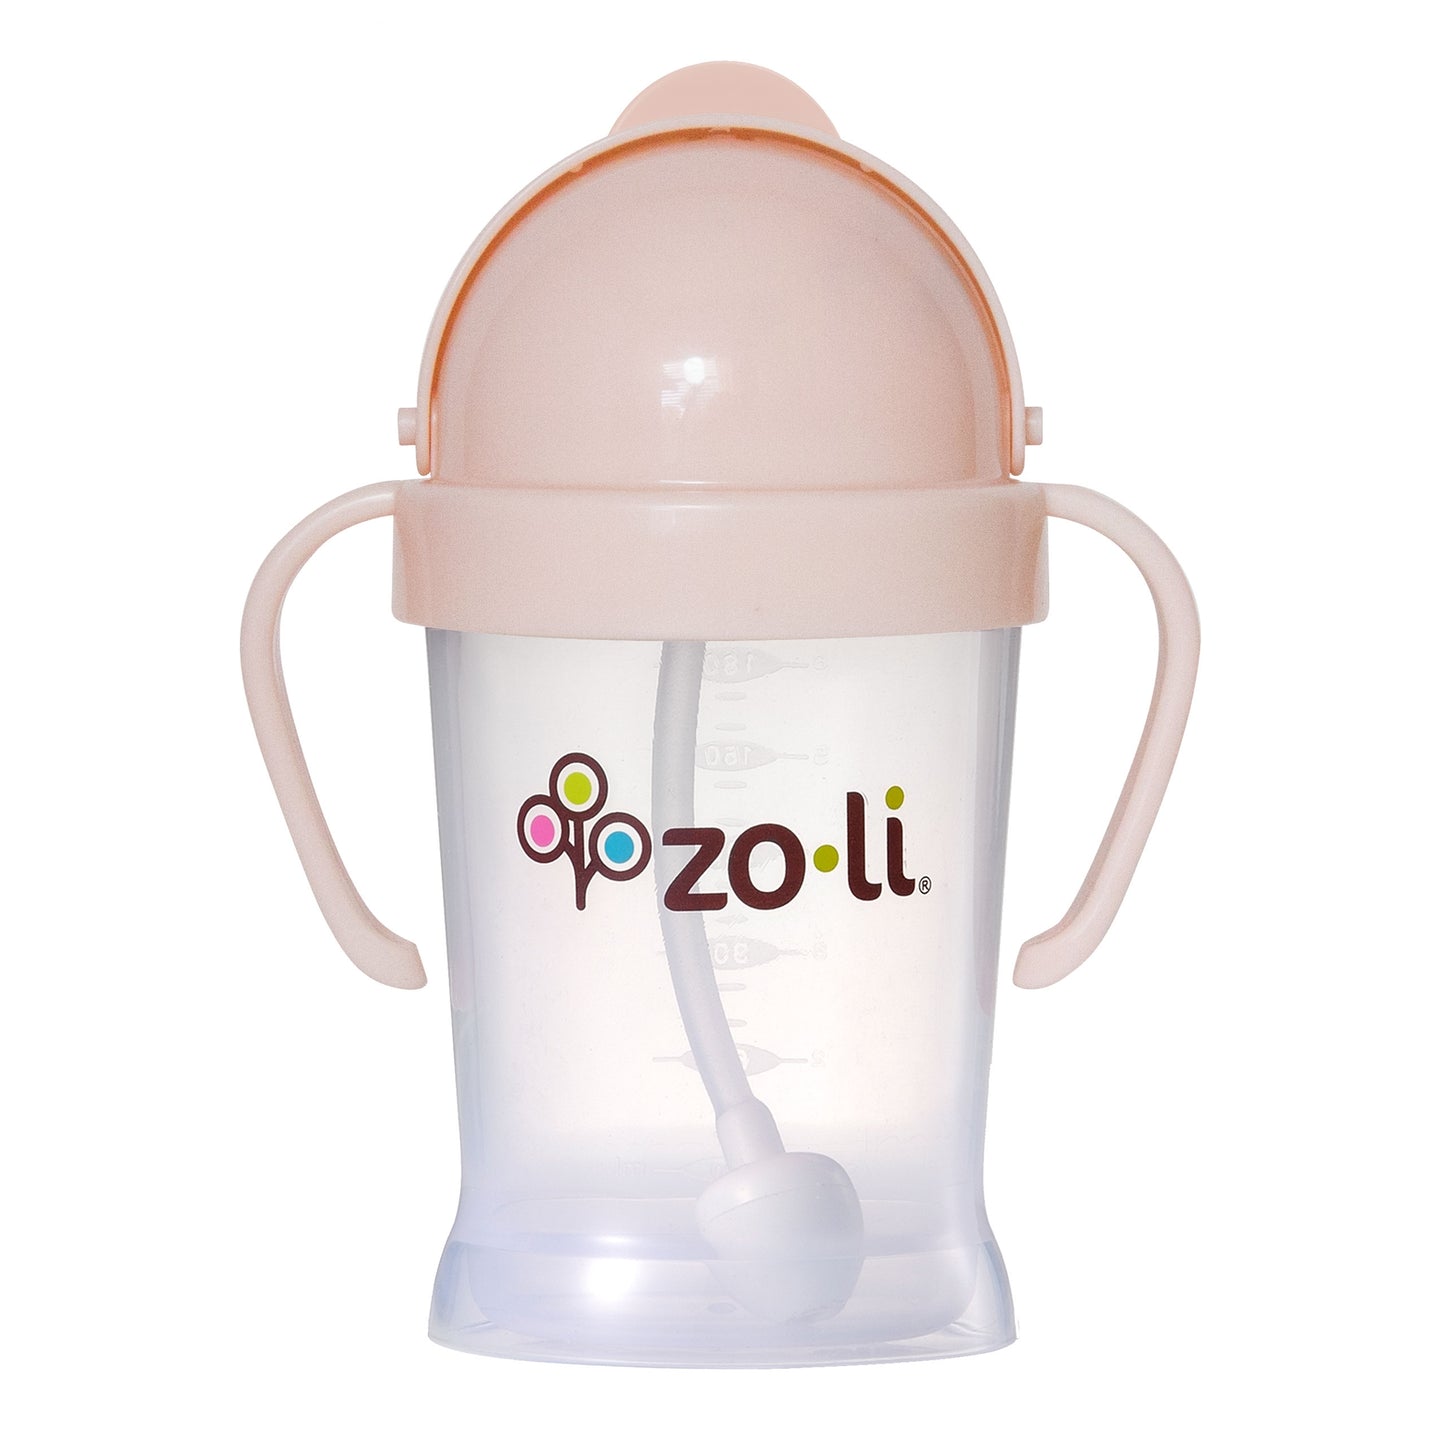 Bot weighted straw sippy cup - Blush